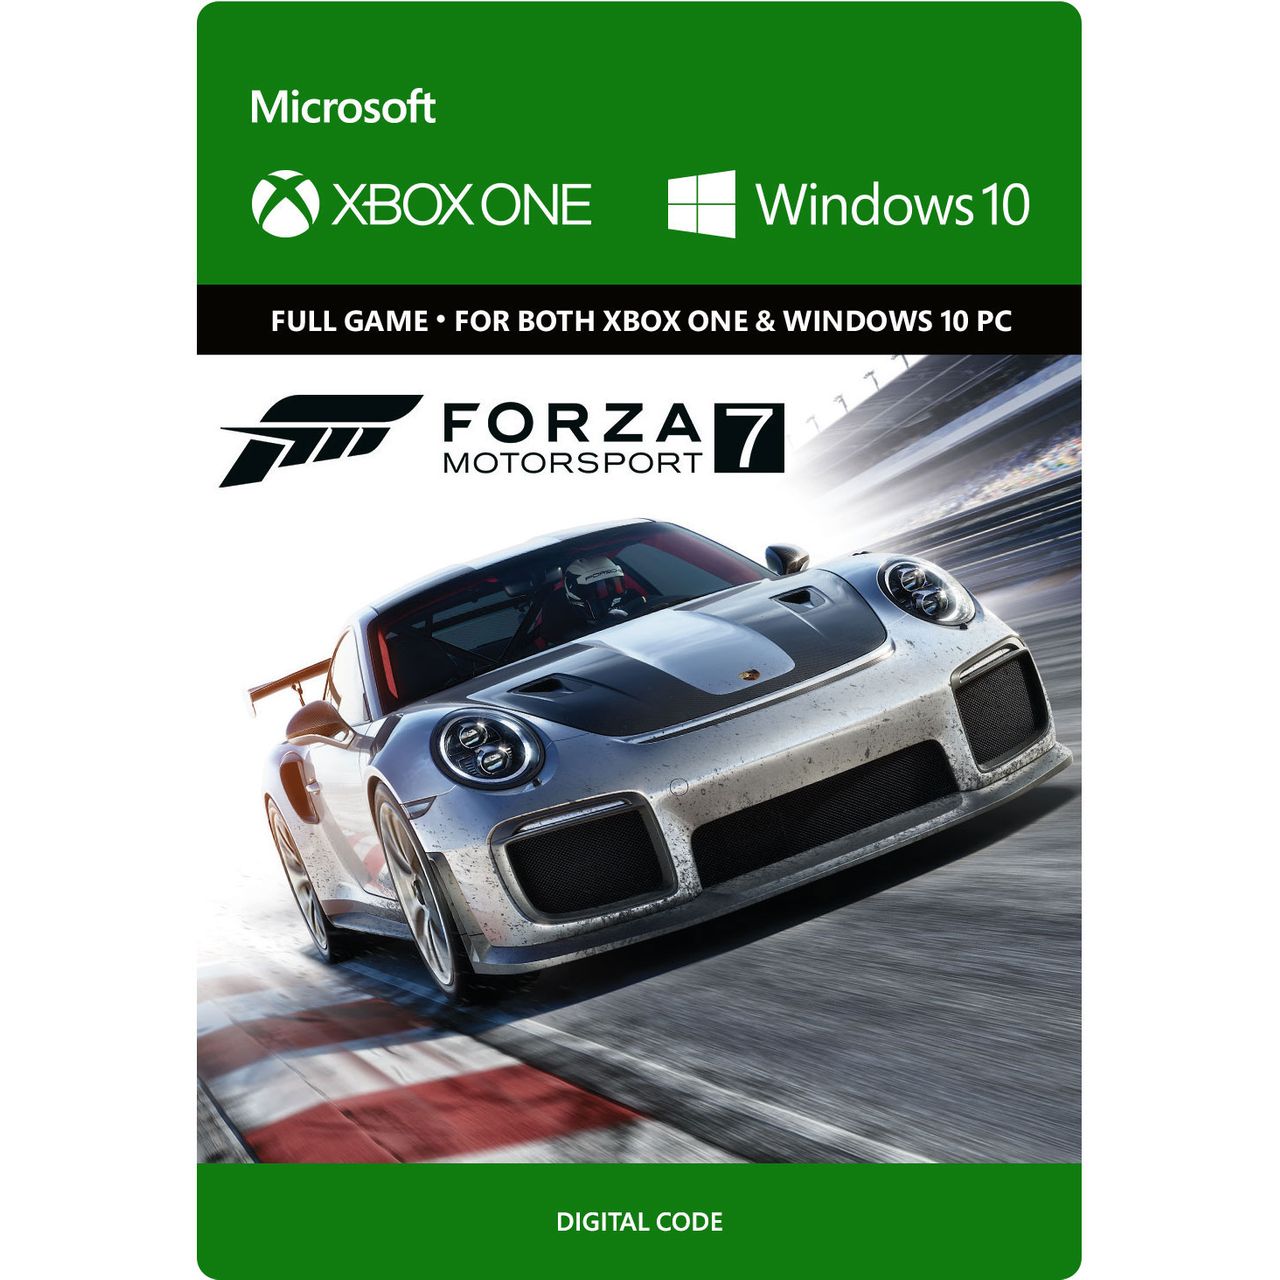 Forza Motorsport 7: Standard Edition for Xbox One [Enhanced for Xbox One X] Review